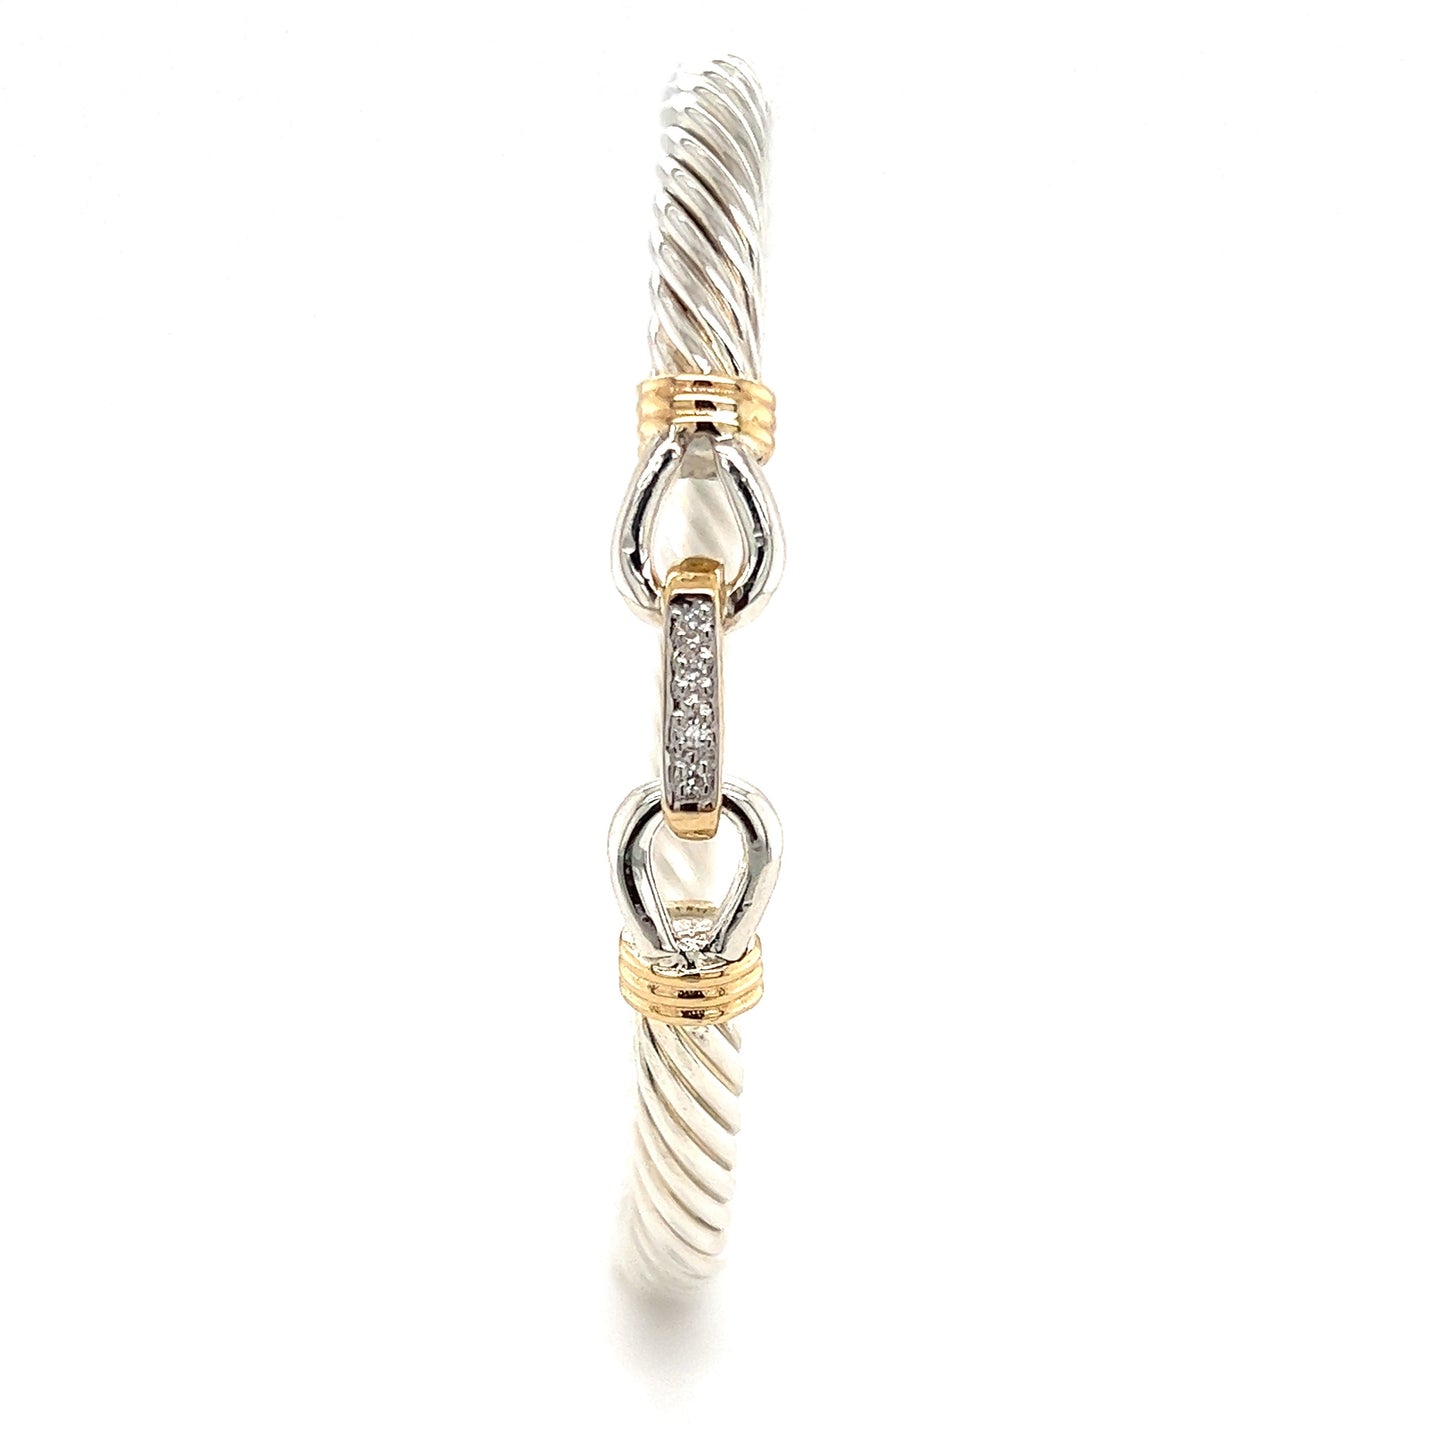 Twisted Cable 5mm Bangle Bracelet with Diamond Catch and 14K Yellow Gold Wraps in Sterling Silver Front View